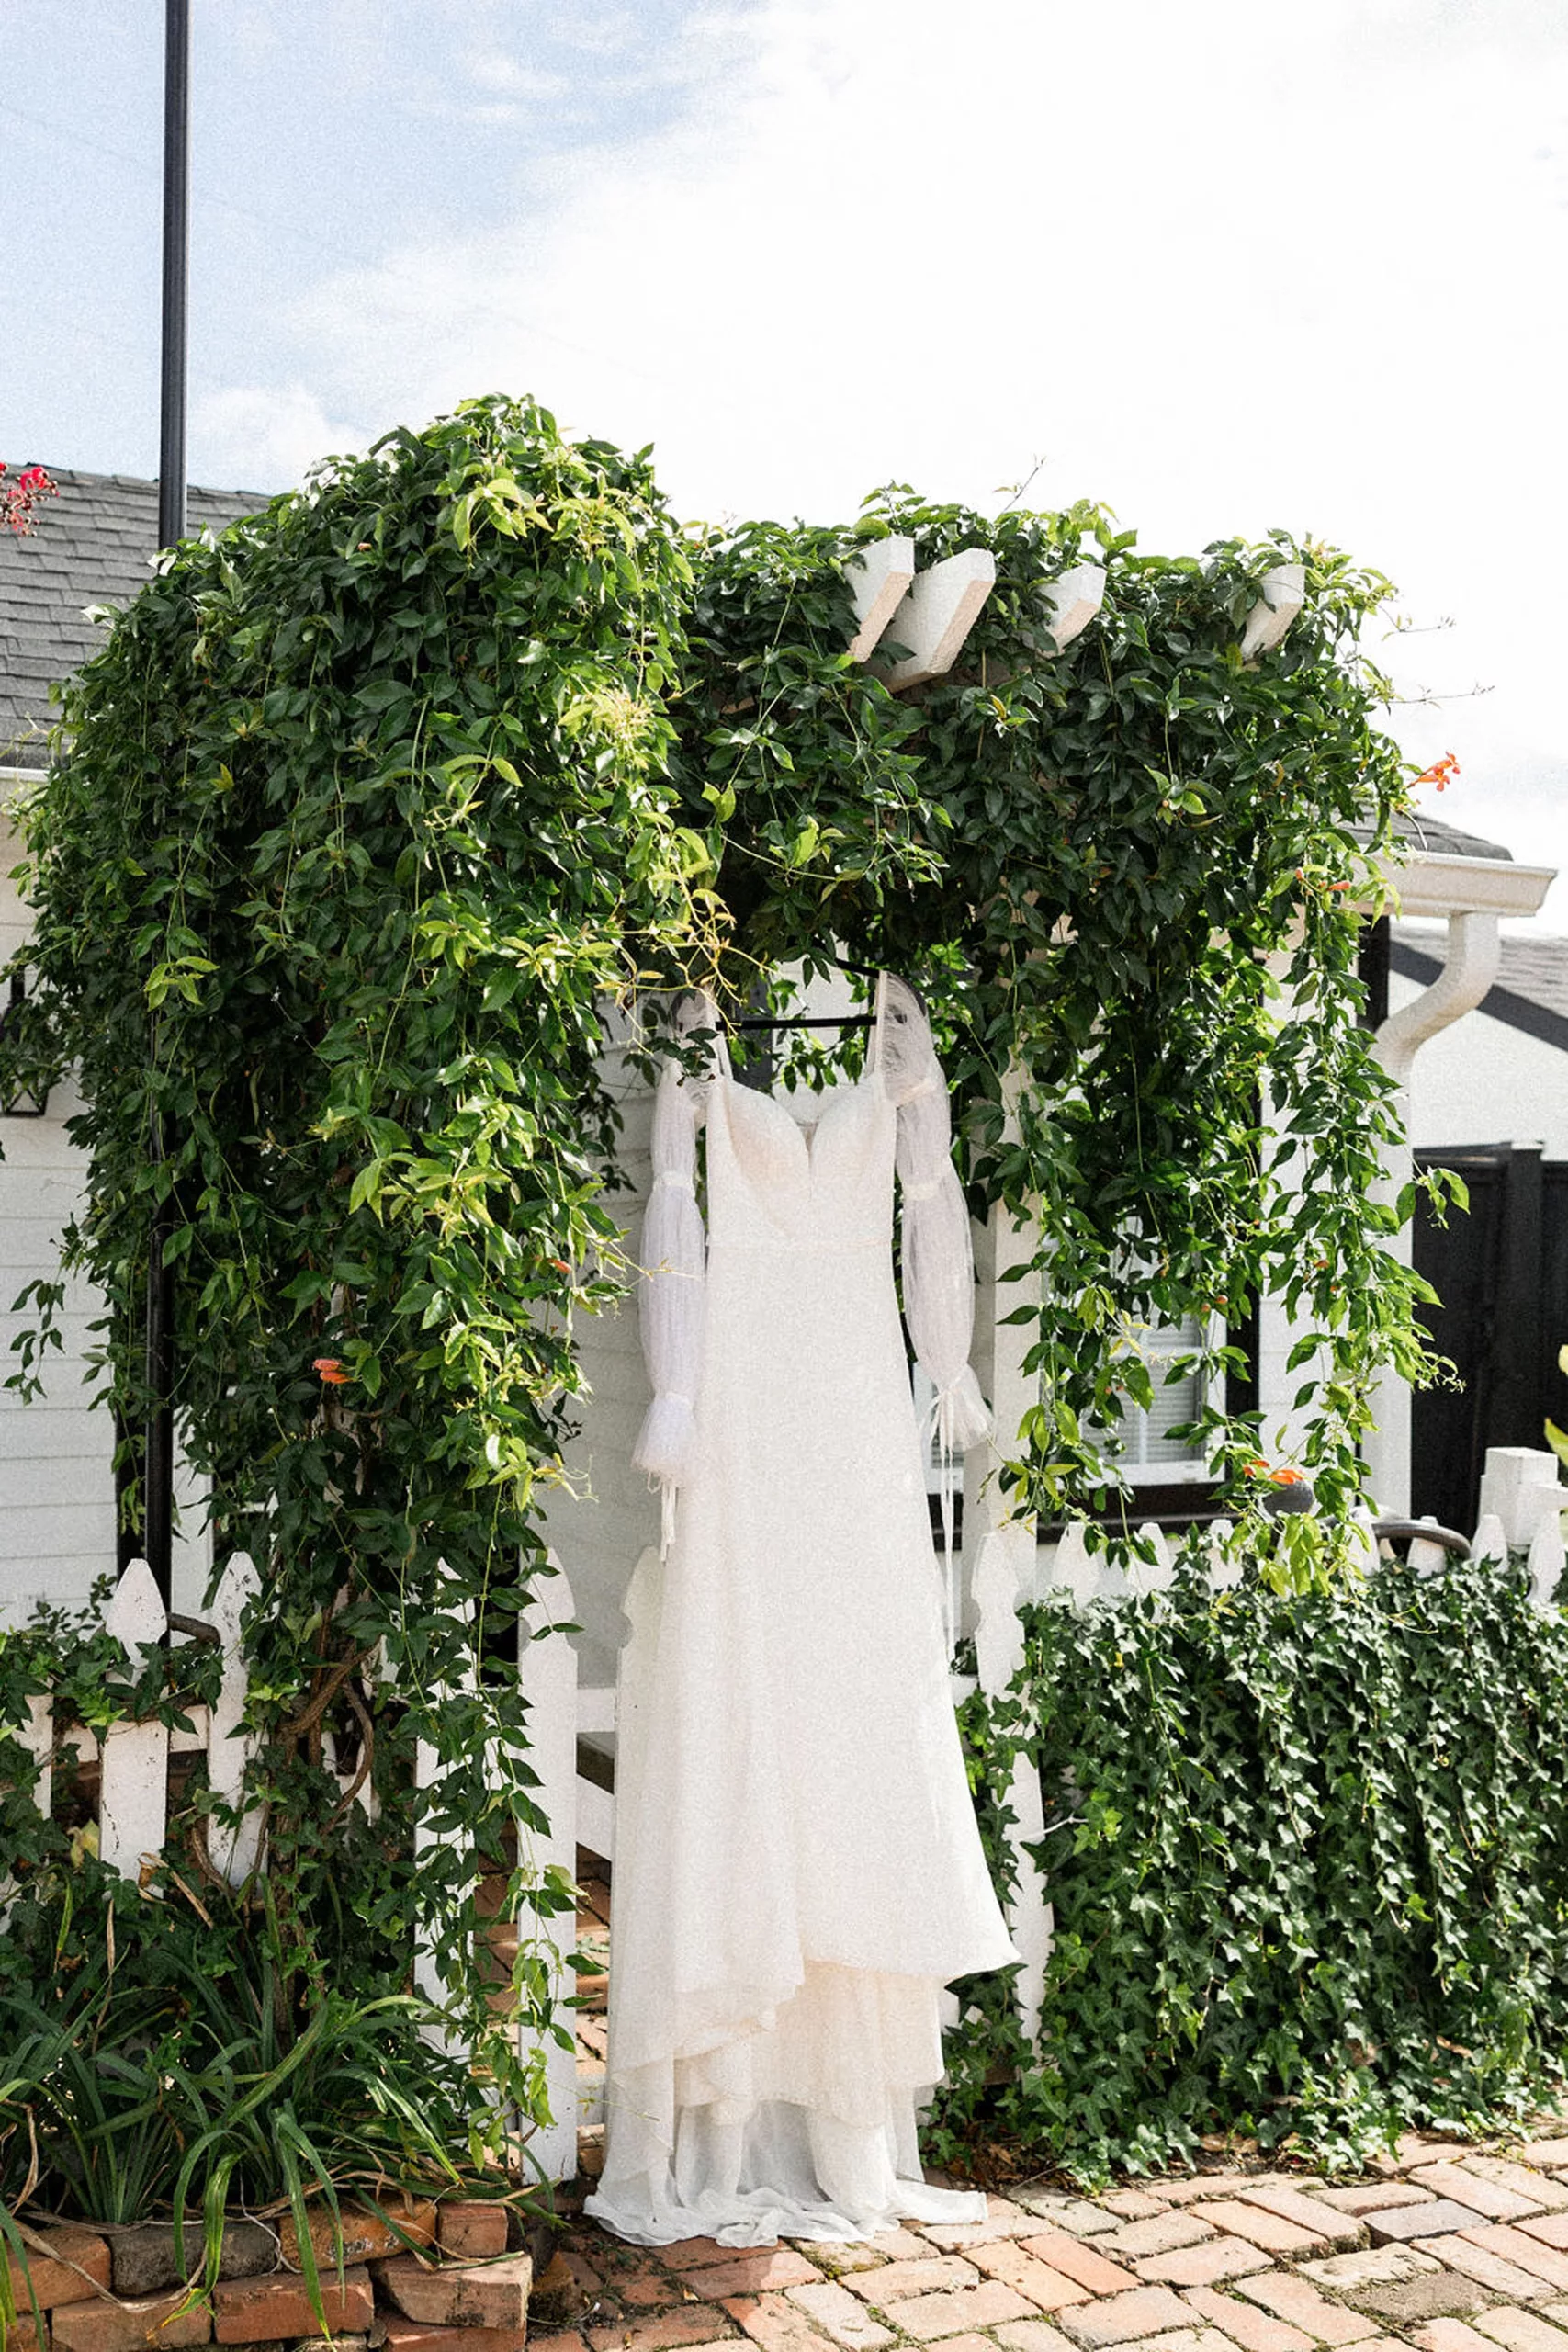 A bride's dress hangs from a vine covered pergola on a brick path in the lillian gardens wedding venue garden